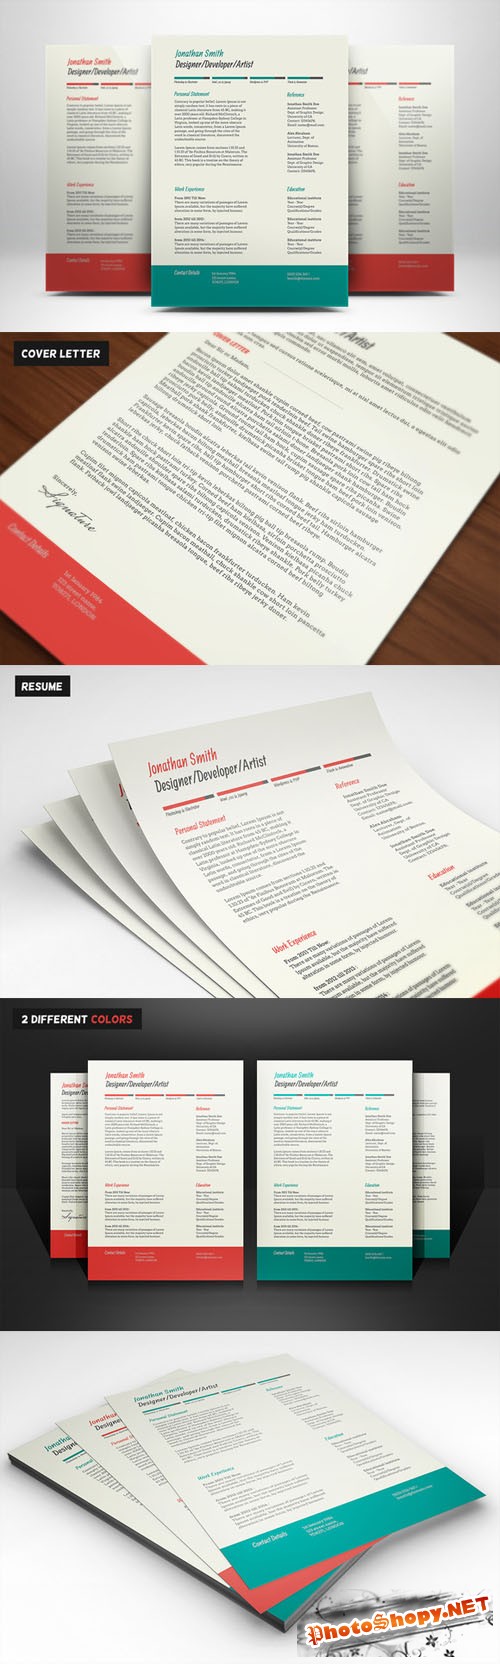 Resume & Cover Letter PSD Template